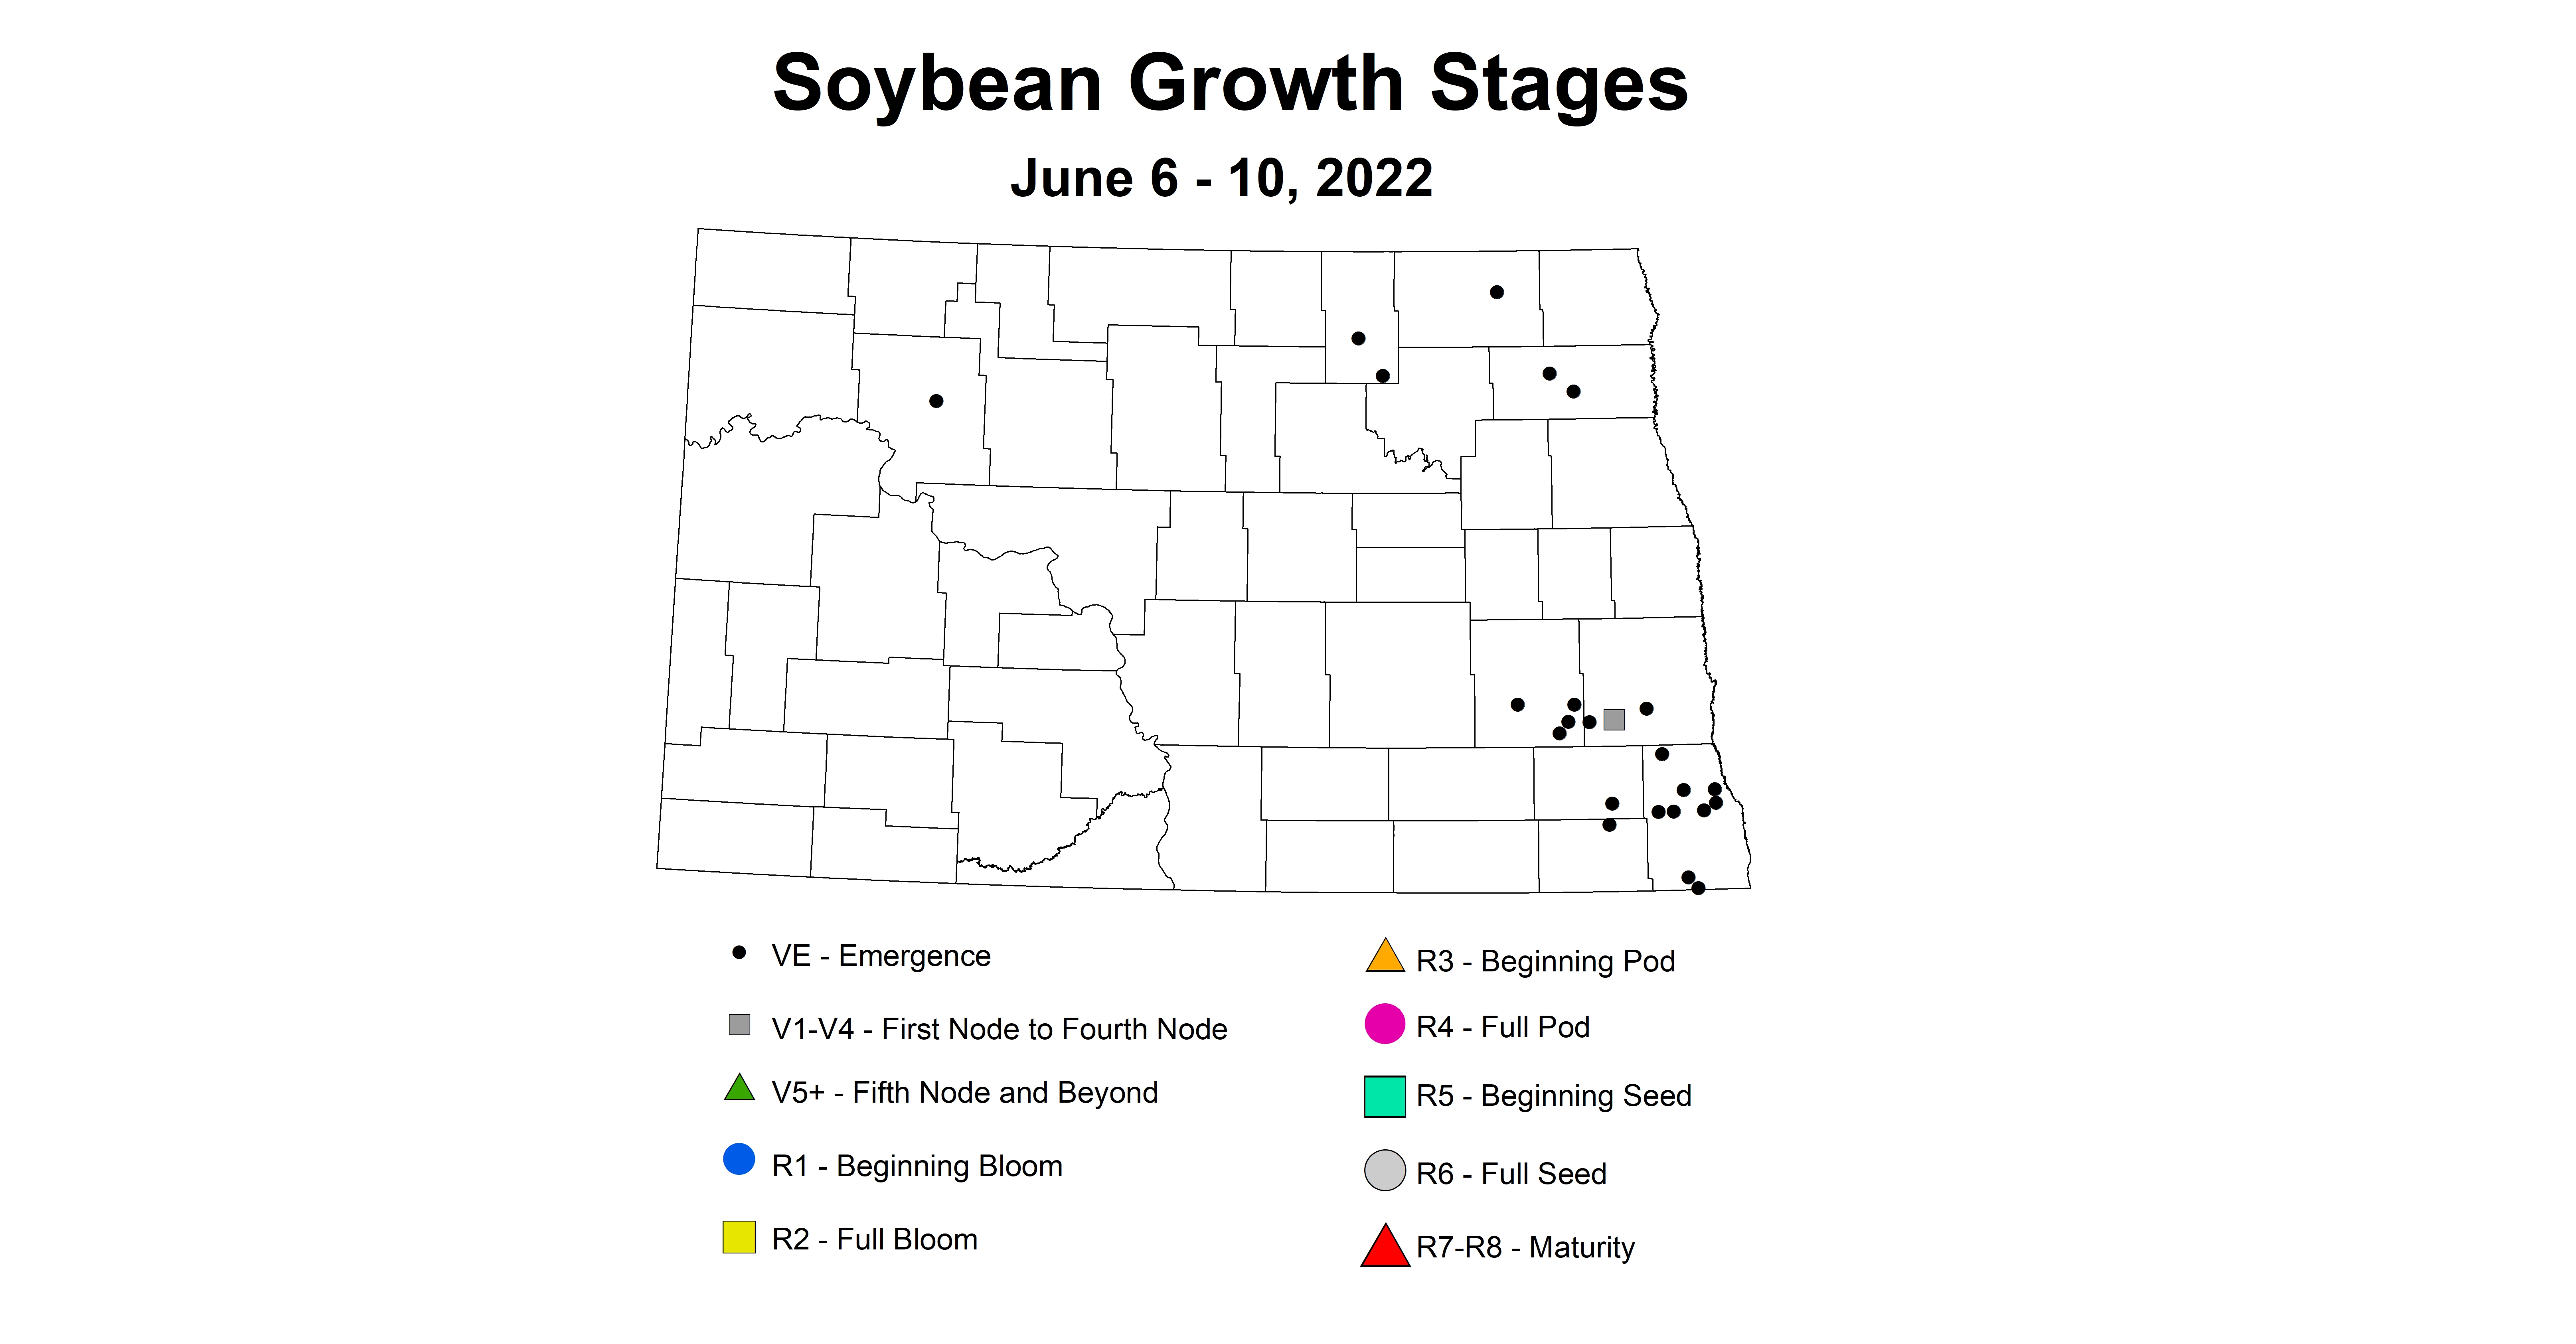 ND IPM map of soybean growth stages June 6-10, 2022